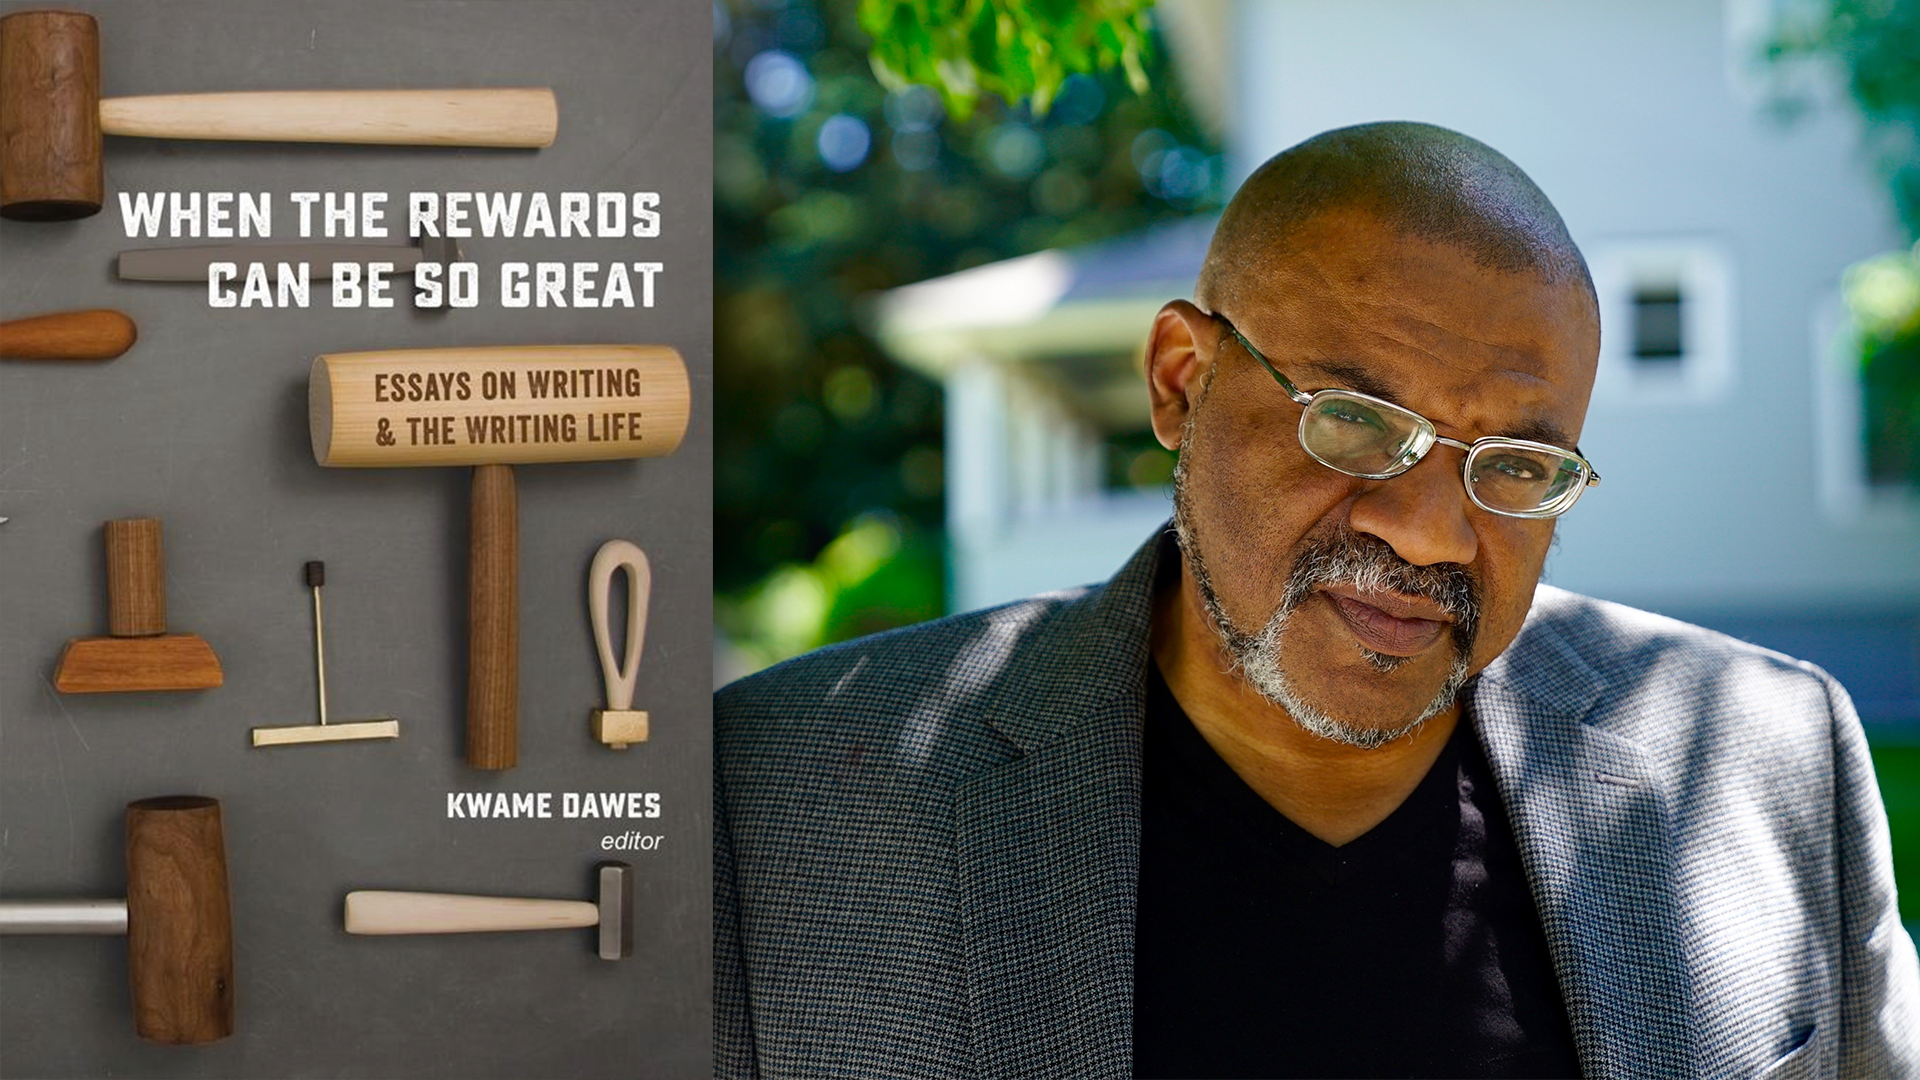 Kwame Dawes and the cover of WHEN THE REWARDS CAN BE SO GREAT; links to news story